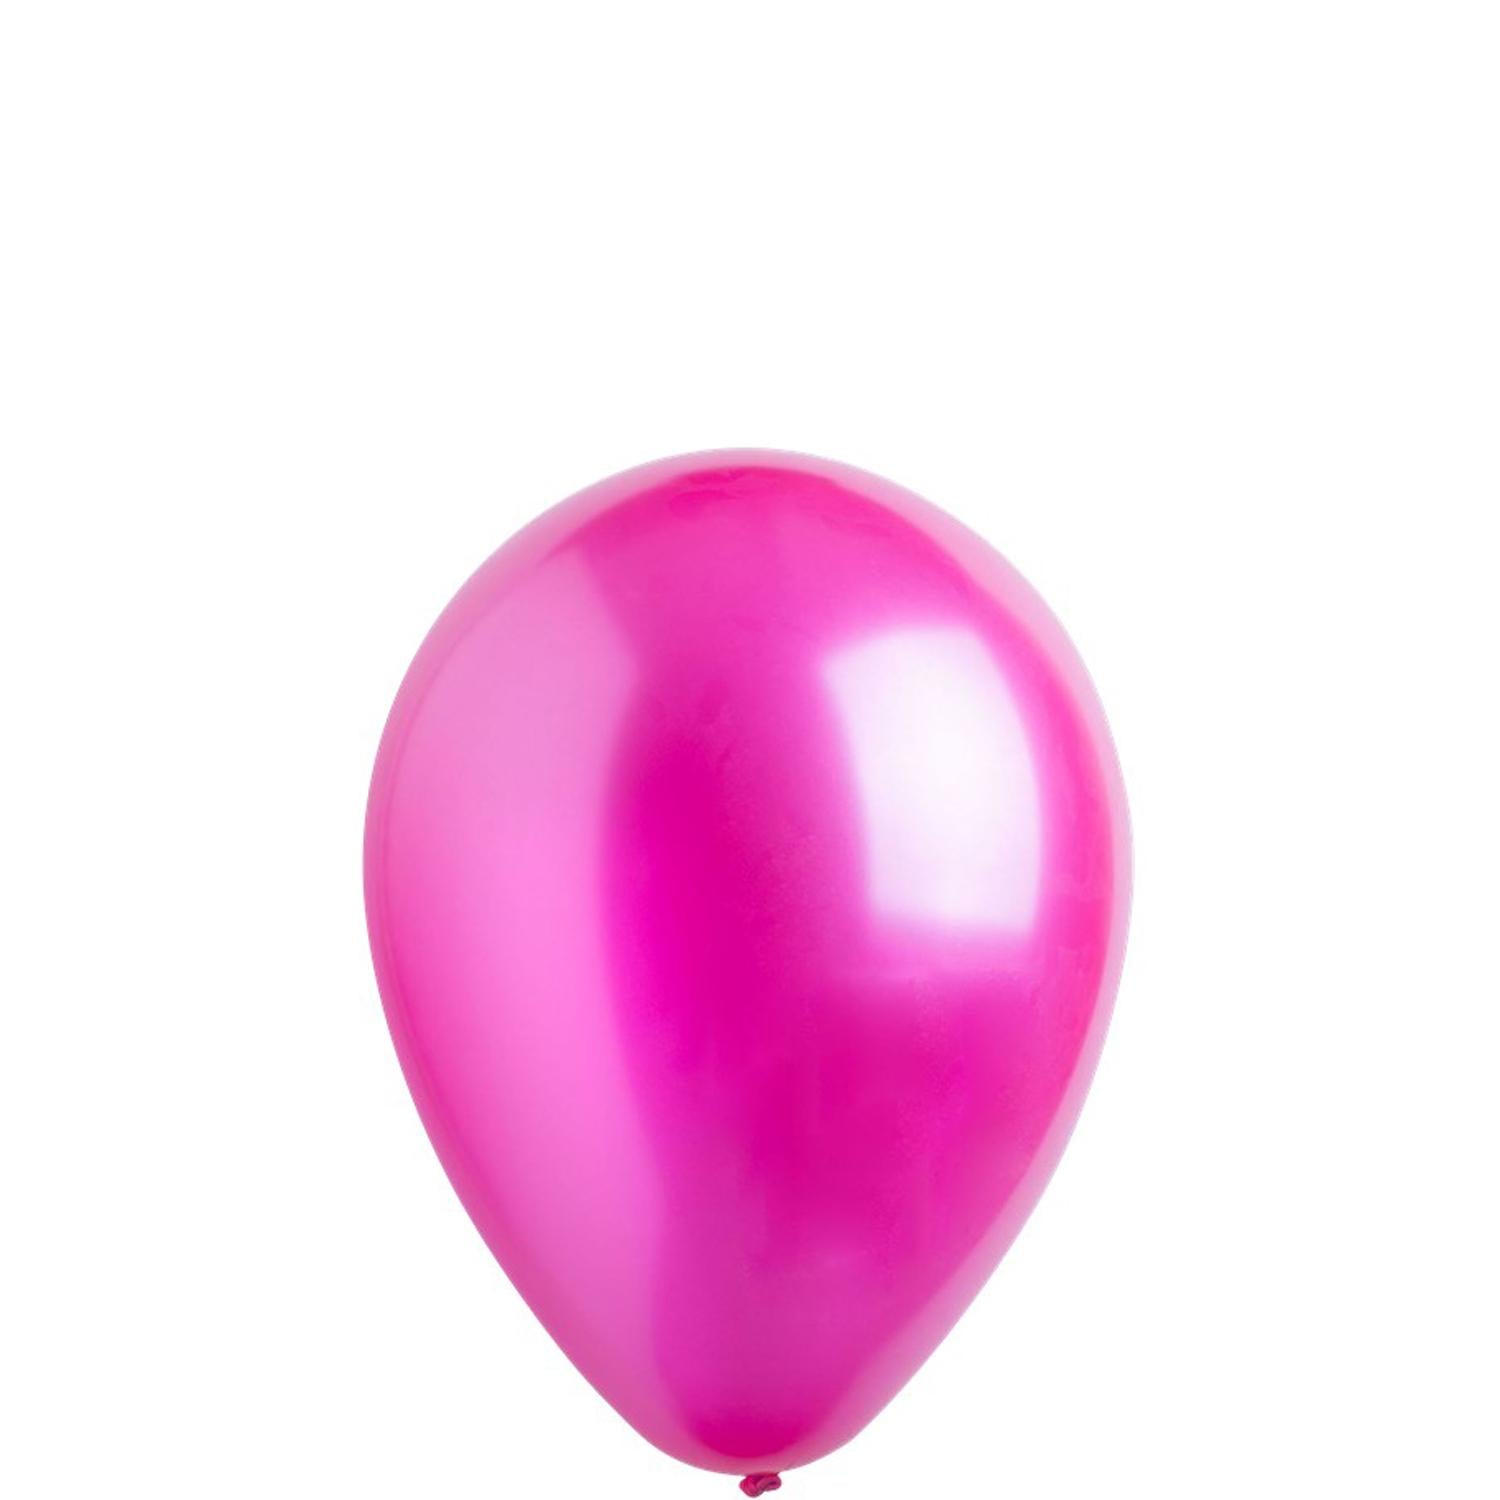 Metallic Hot Pink Latex Balloons 5in, 100pcs Balloons & Streamers - Party Centre